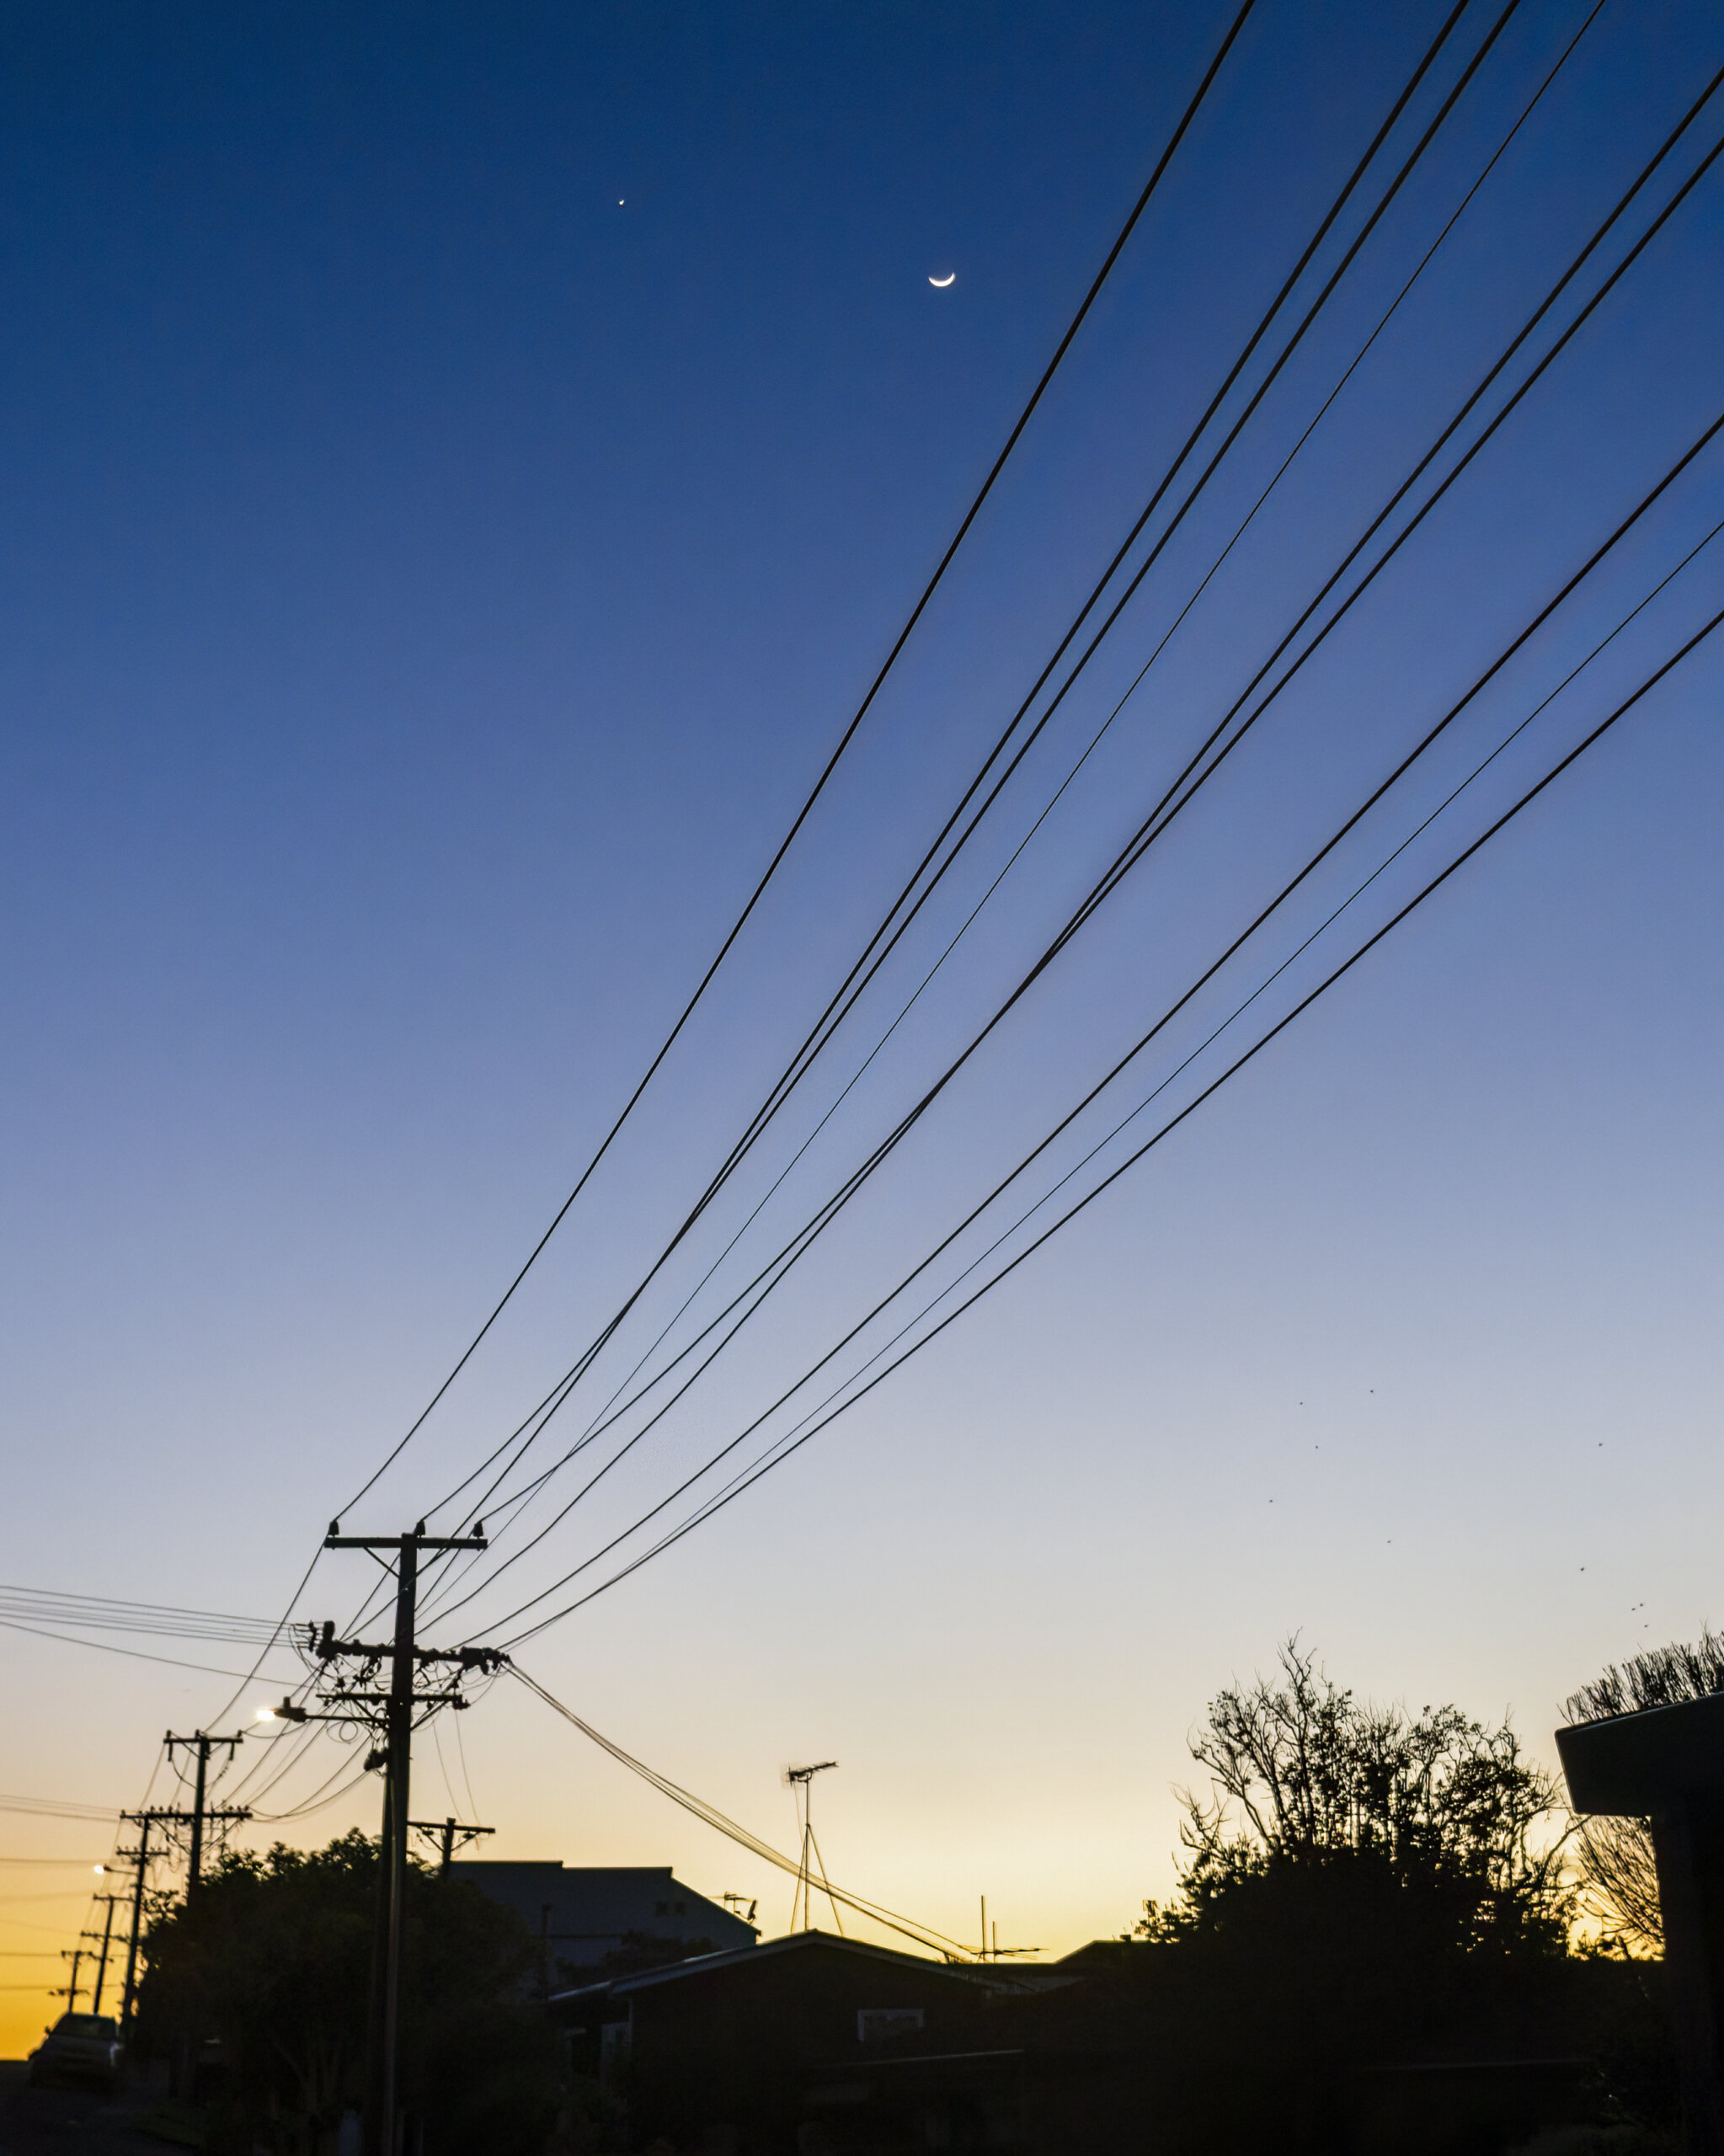 Waxing crescent moon over silhouette powerlines at dawn. Auckland. Vertical format. (Getty Images)